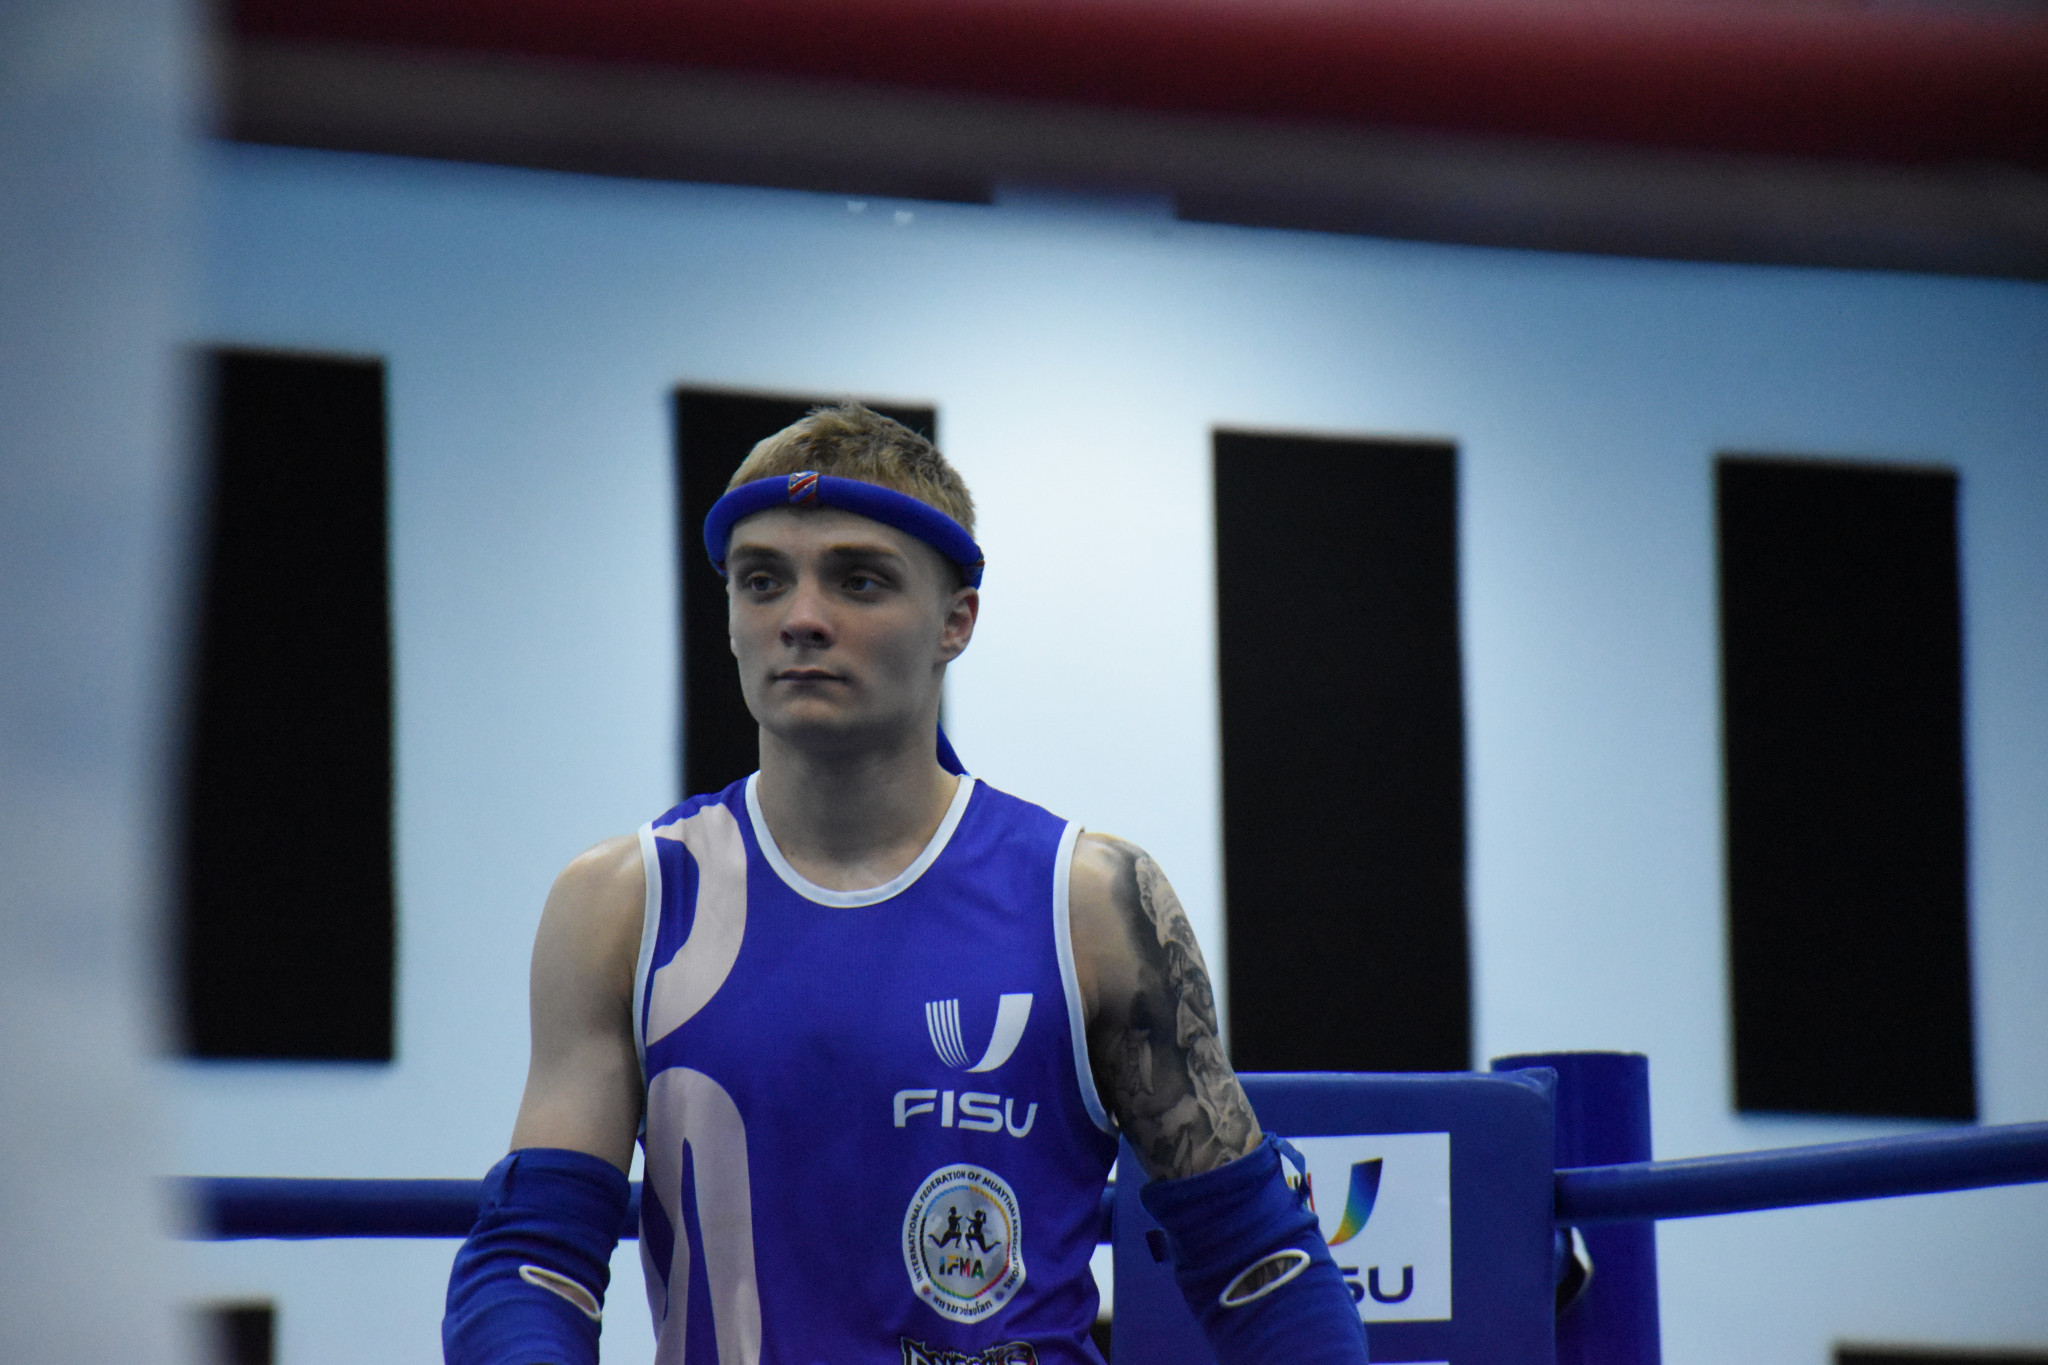 A muaythai fighter wearing the traditional headband prior to his fight ©FISU